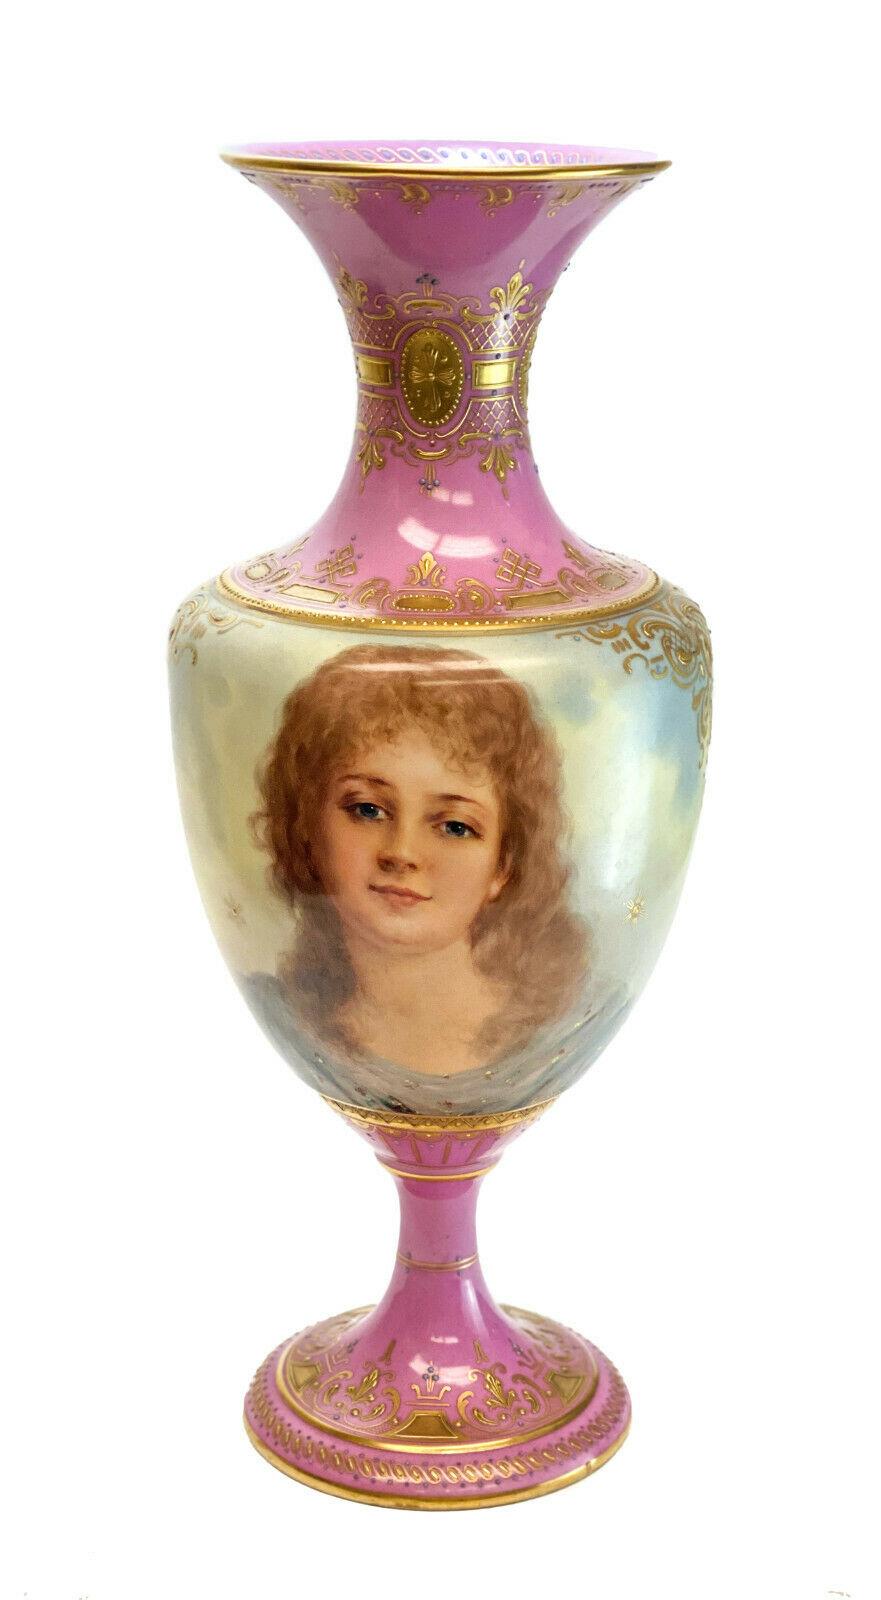 Royal Vienna Austria hand painted porcelain footed vase, circa 1900. The vase depicts a profile portrait of a blonde and brunette beauty to either sides. Artist singed 